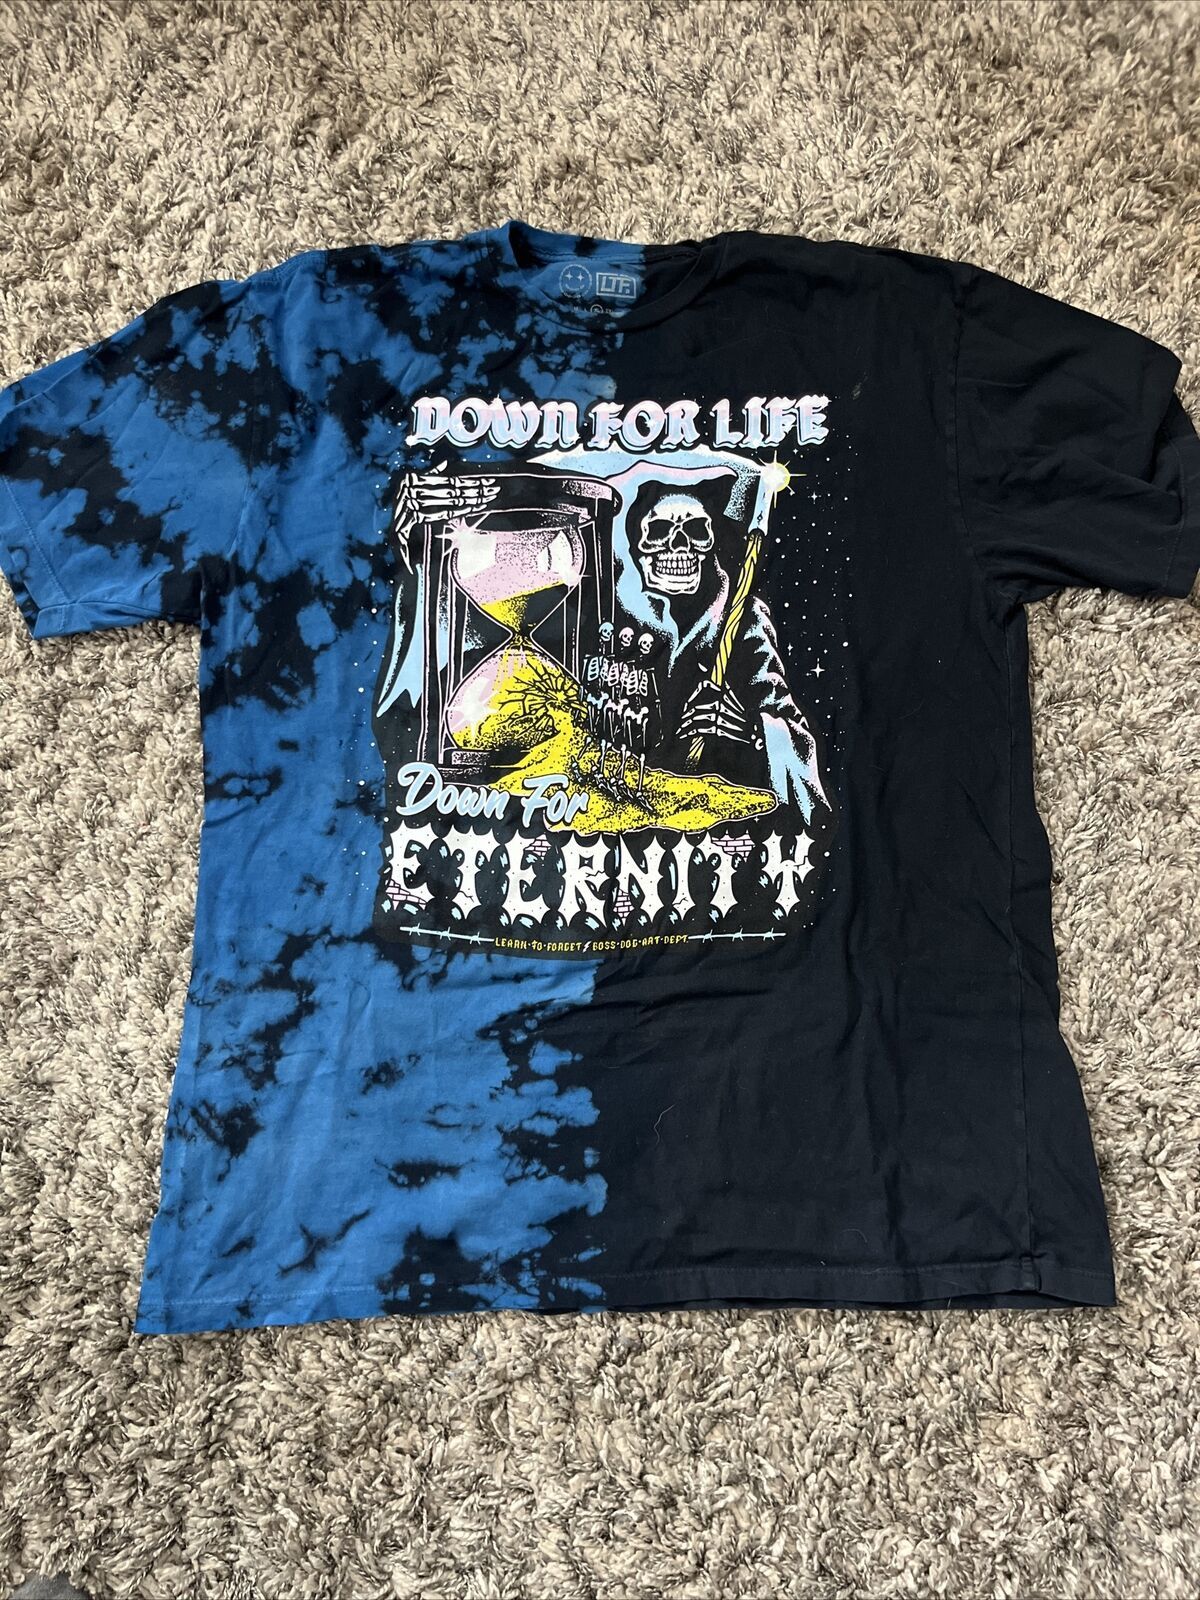 Primary image for Down For Life Down For Eternity T-Shirt Black And Blue Size XL